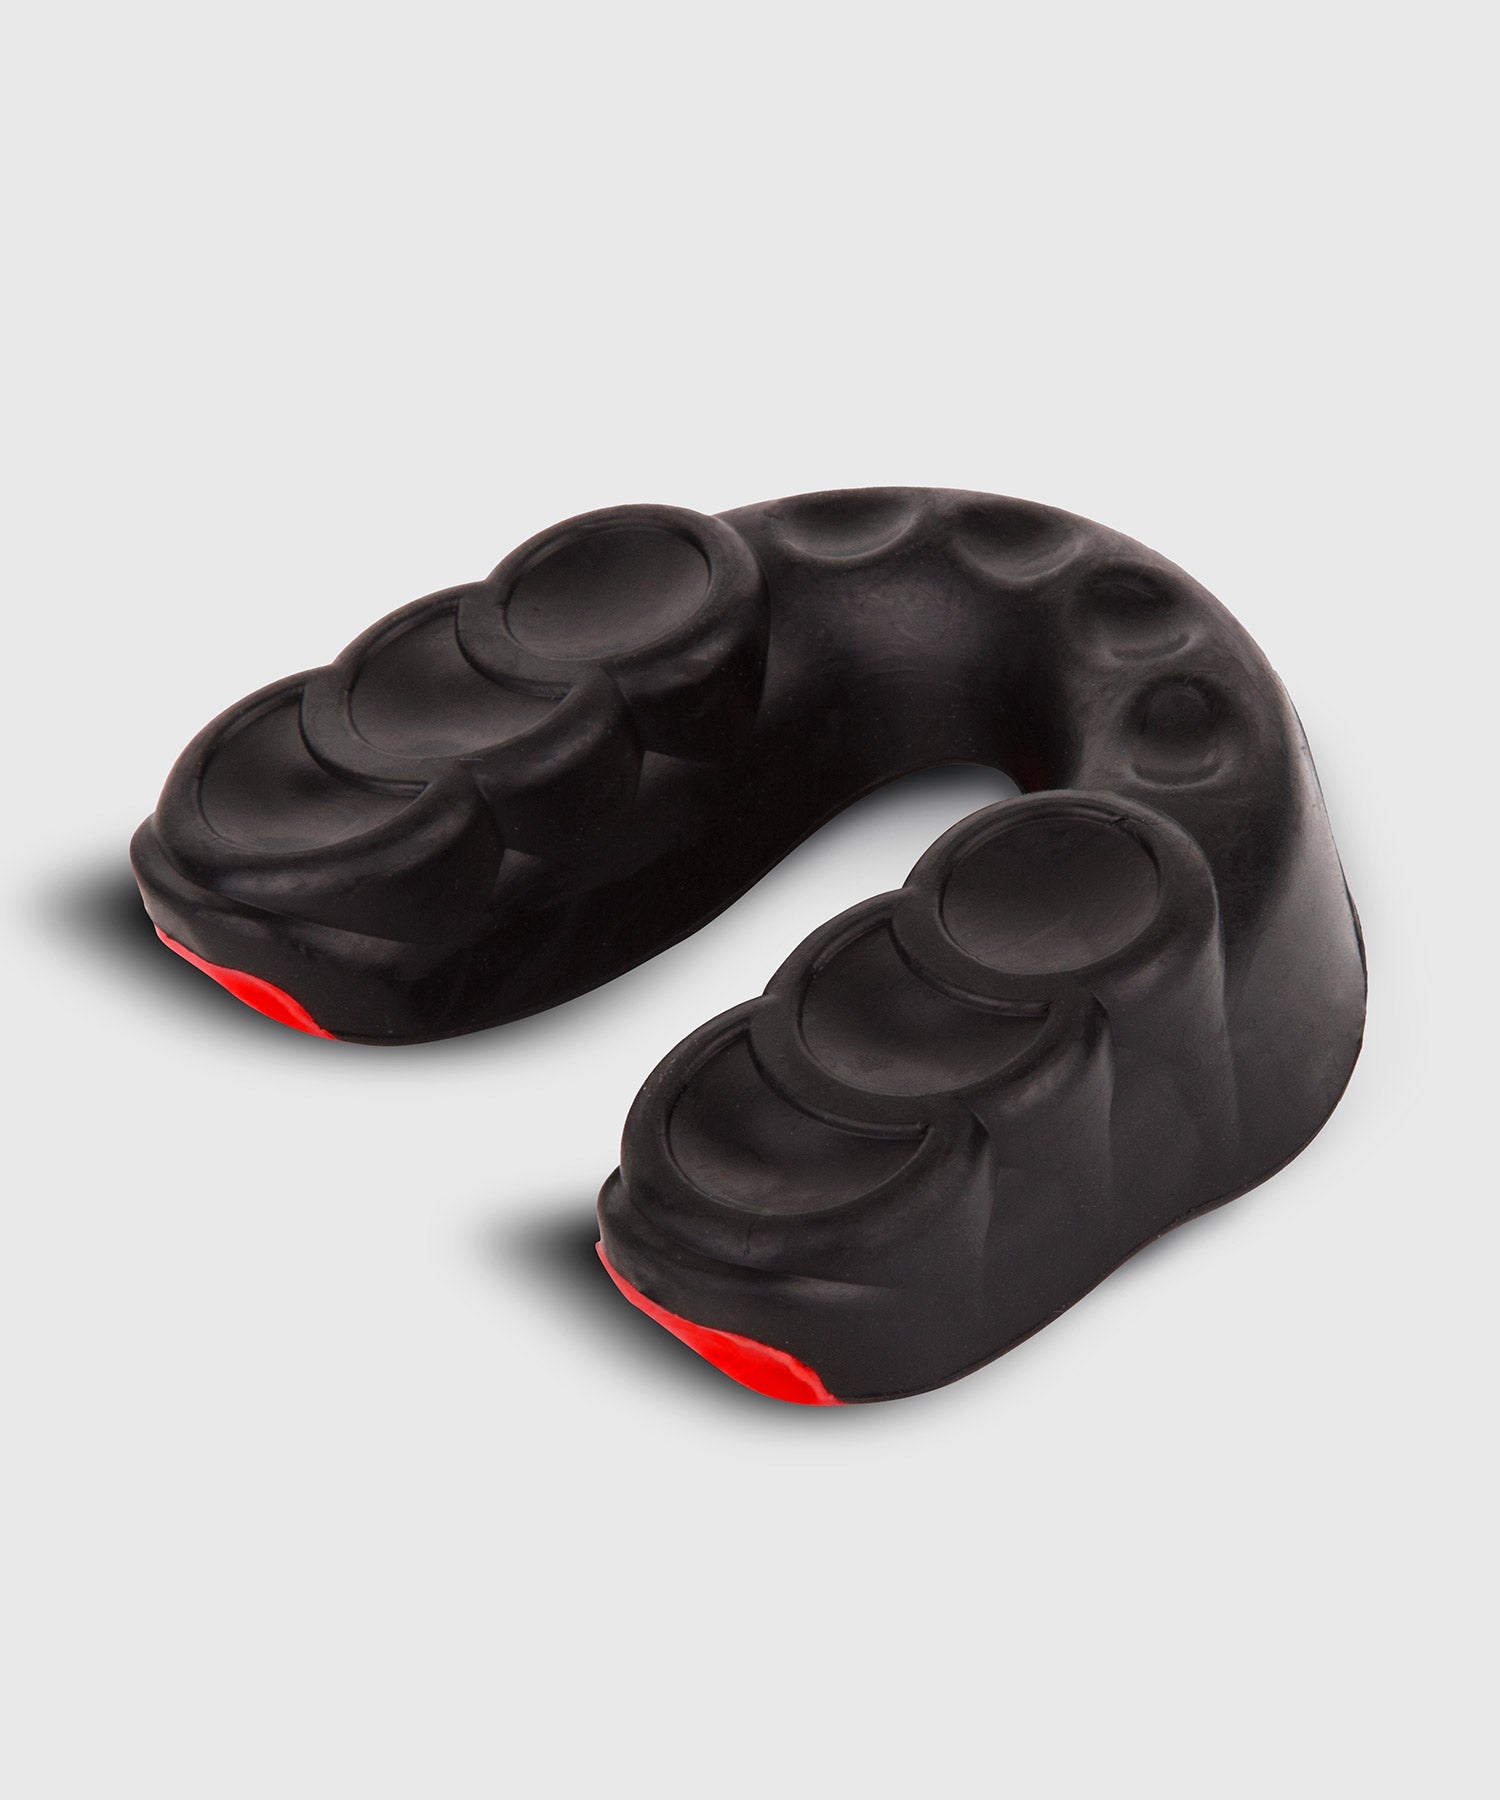 Venum Challenger Mouthguard Red